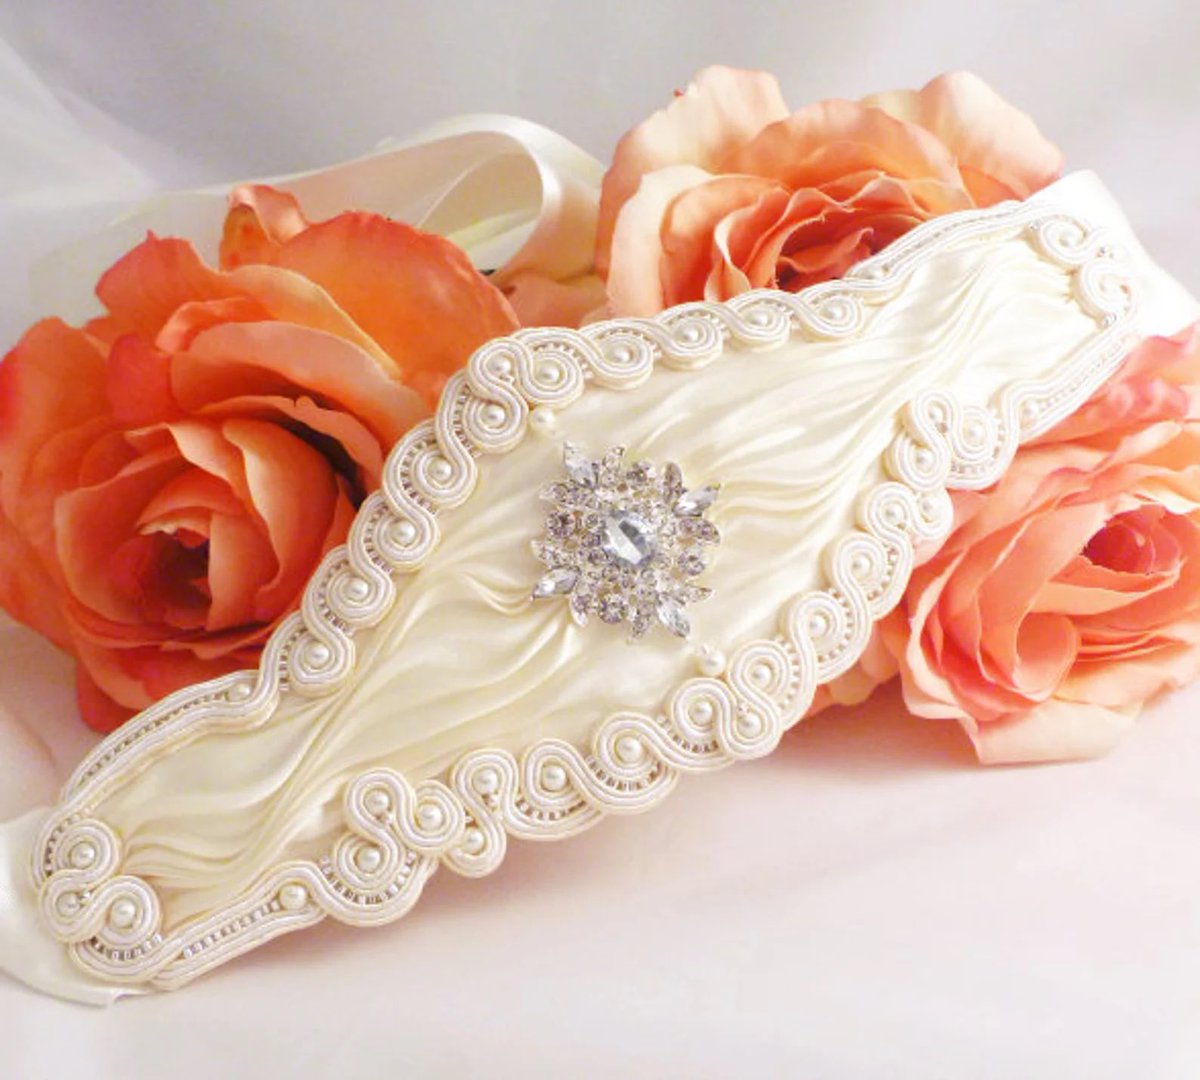 Wedding planning? This beautiful sash is half price as it’s an end of line piece, etsy.com/uk/listing/246… #elevenseshour #bridal #etsy #MHHSBD